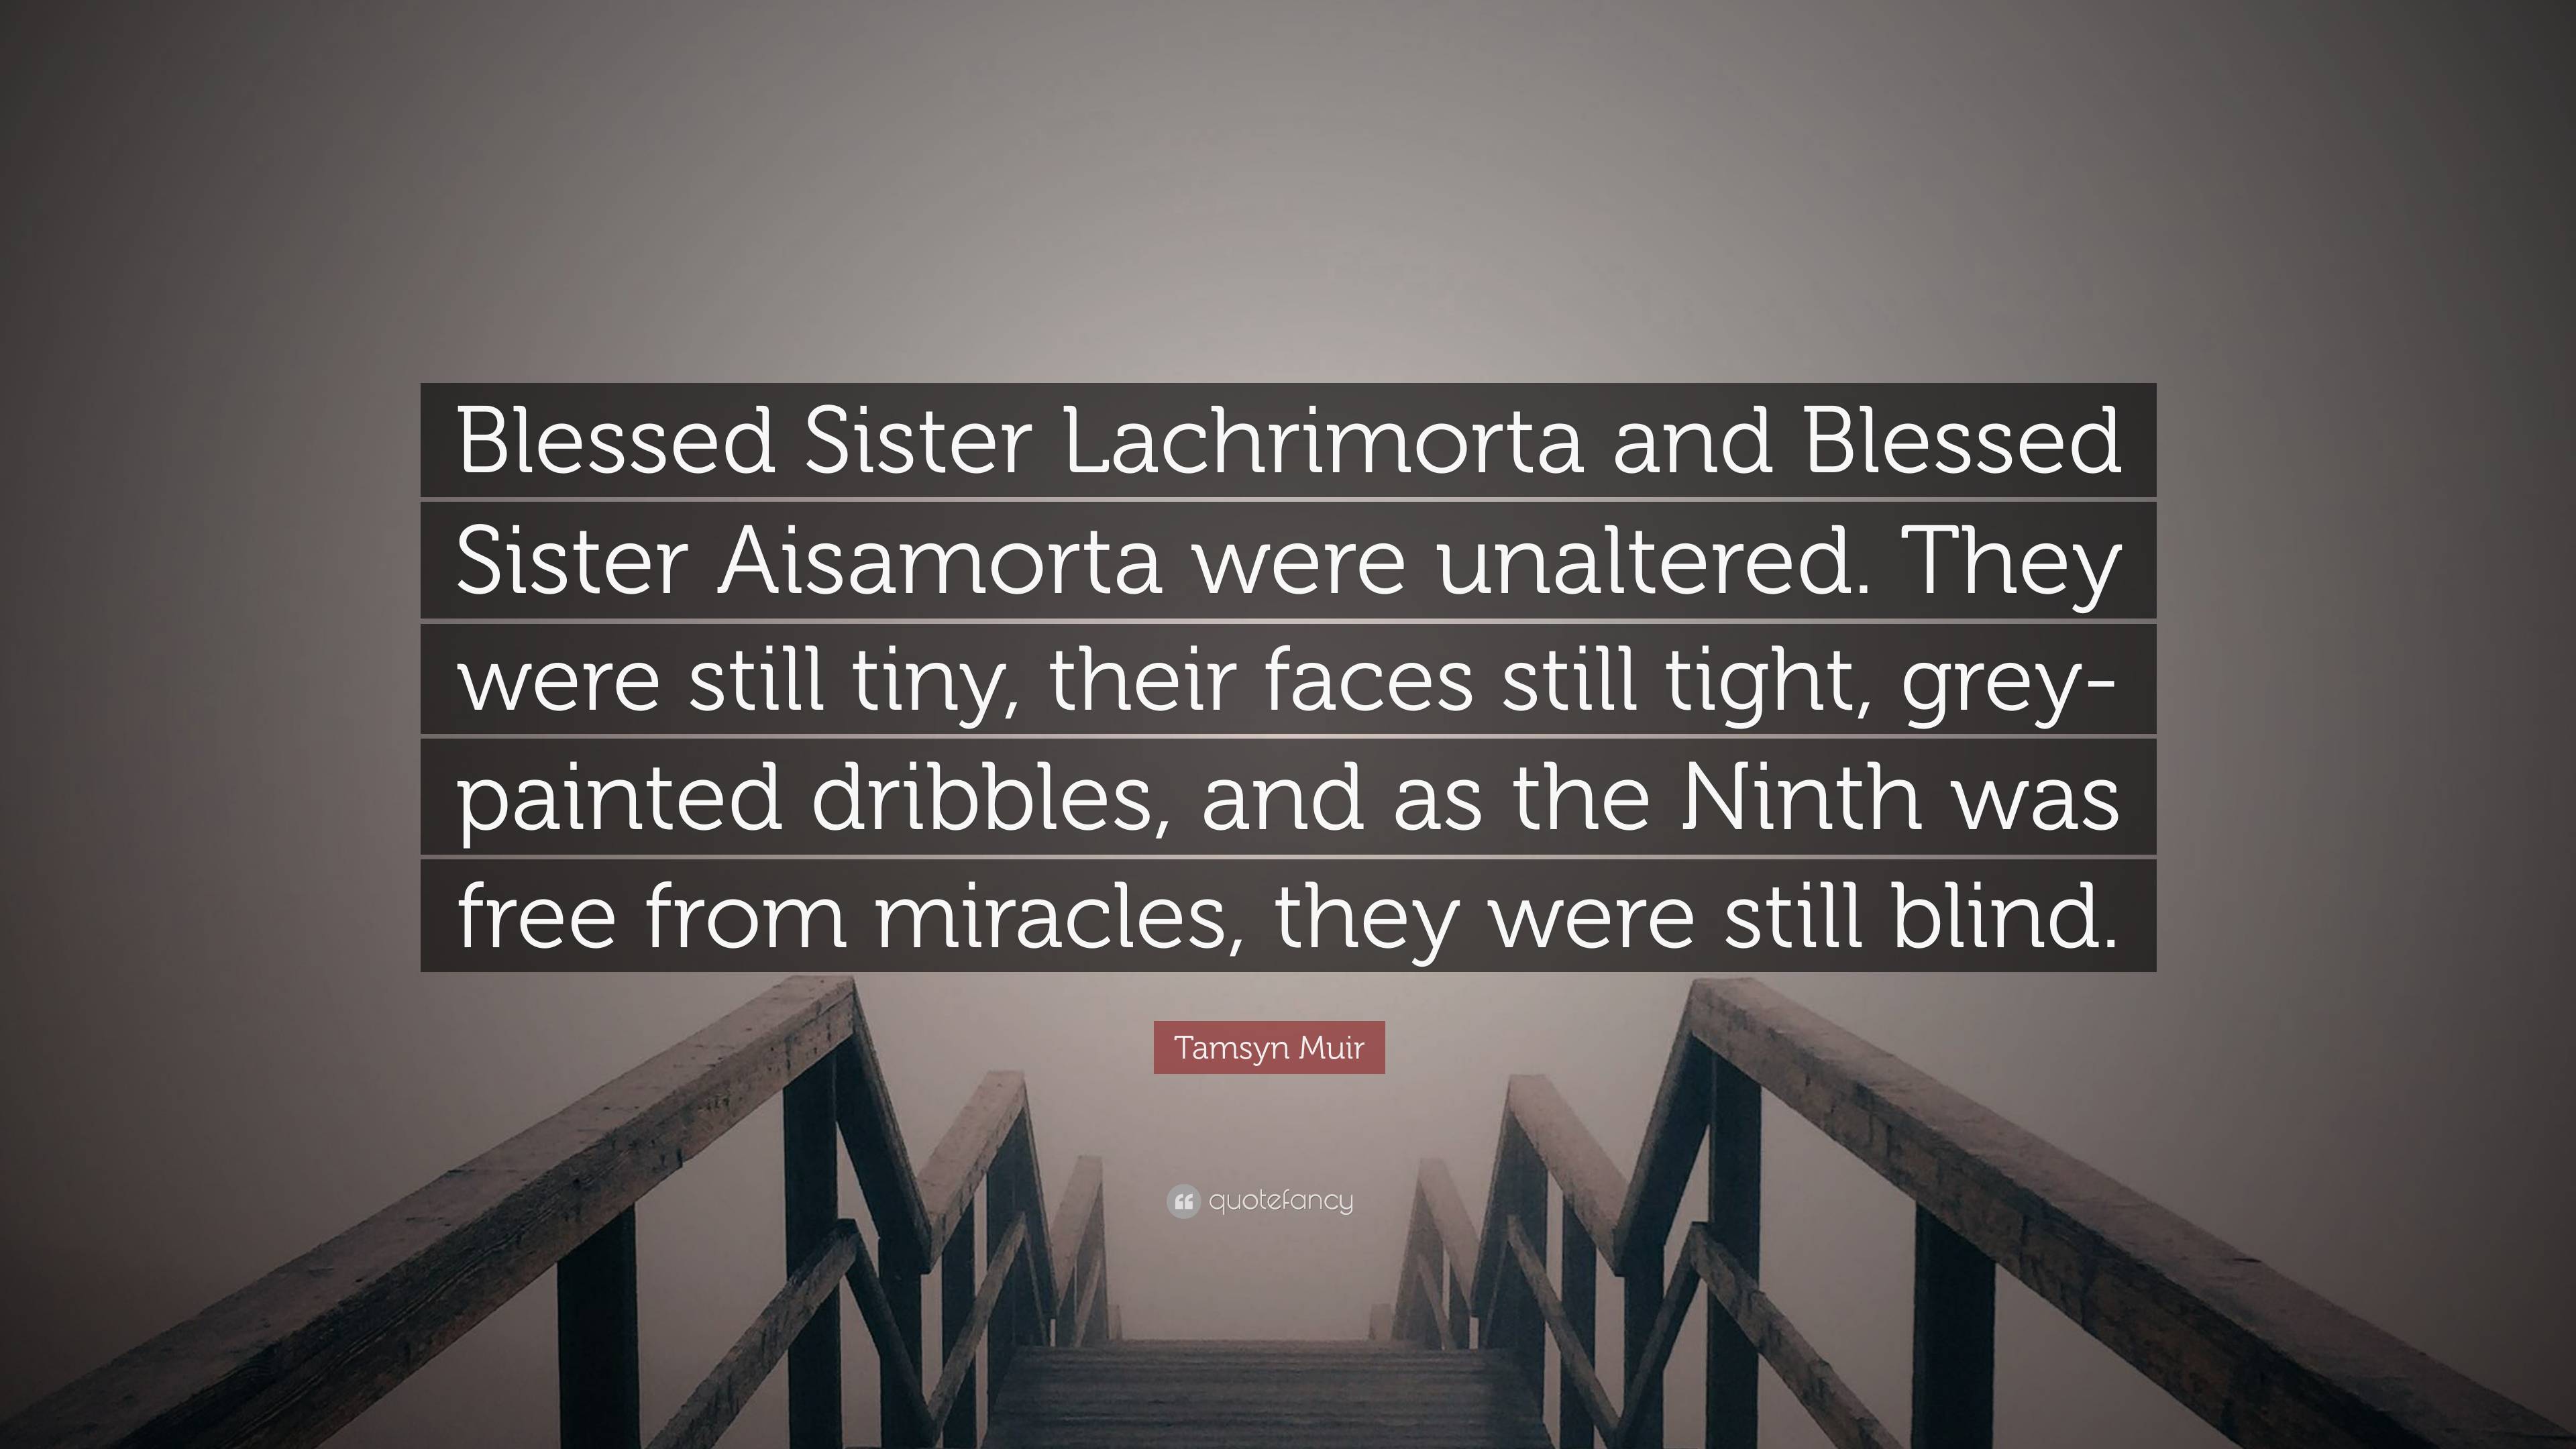 Tamsyn Muir Quote: “Blessed Sister Lachrimorta and Blessed Sister Aisamorta  were unaltered. They were still tiny, their faces still tight, g”